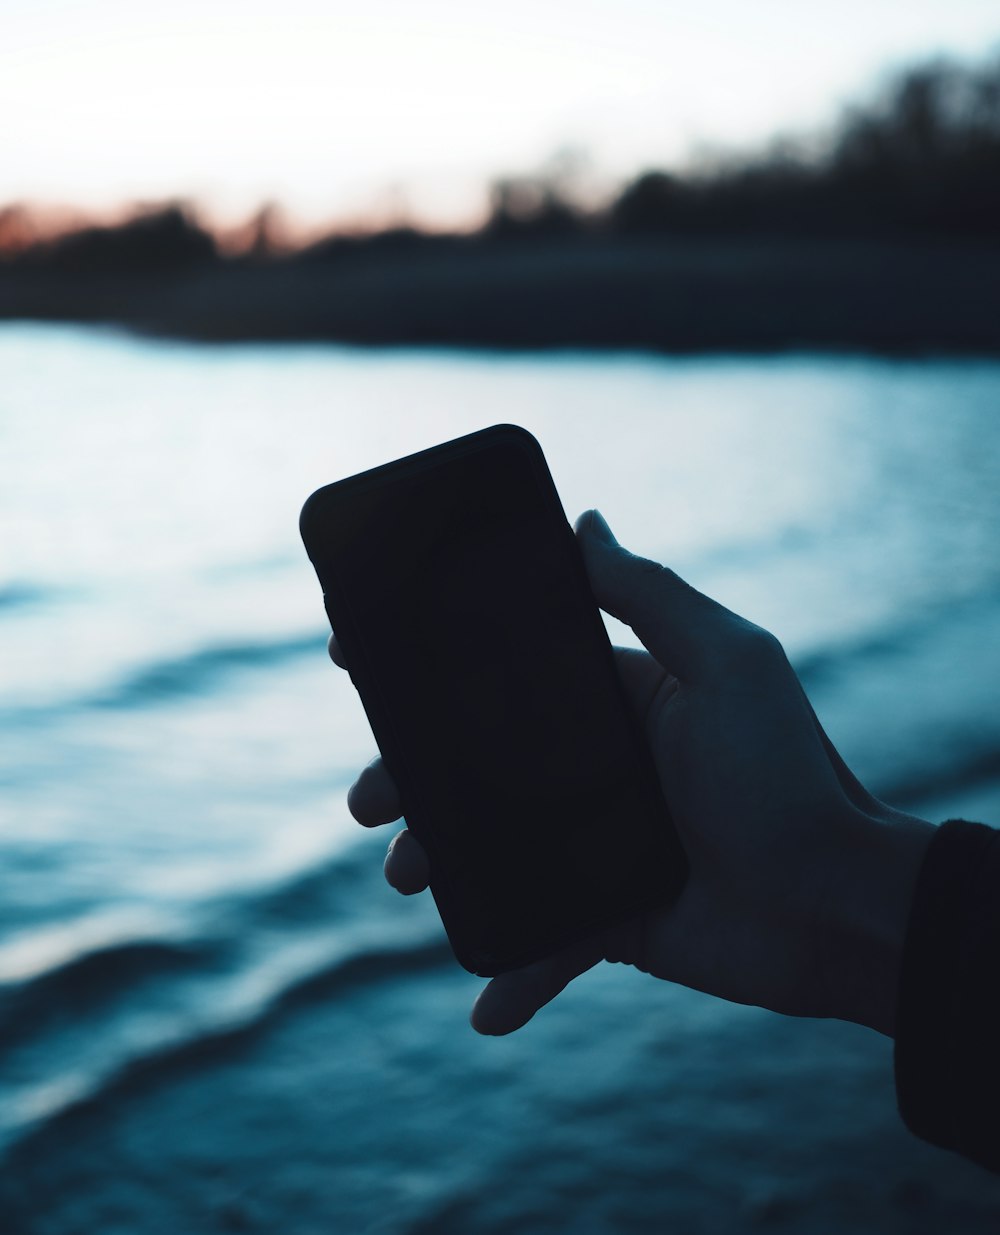 person holding black smartphone near body of water during daytime